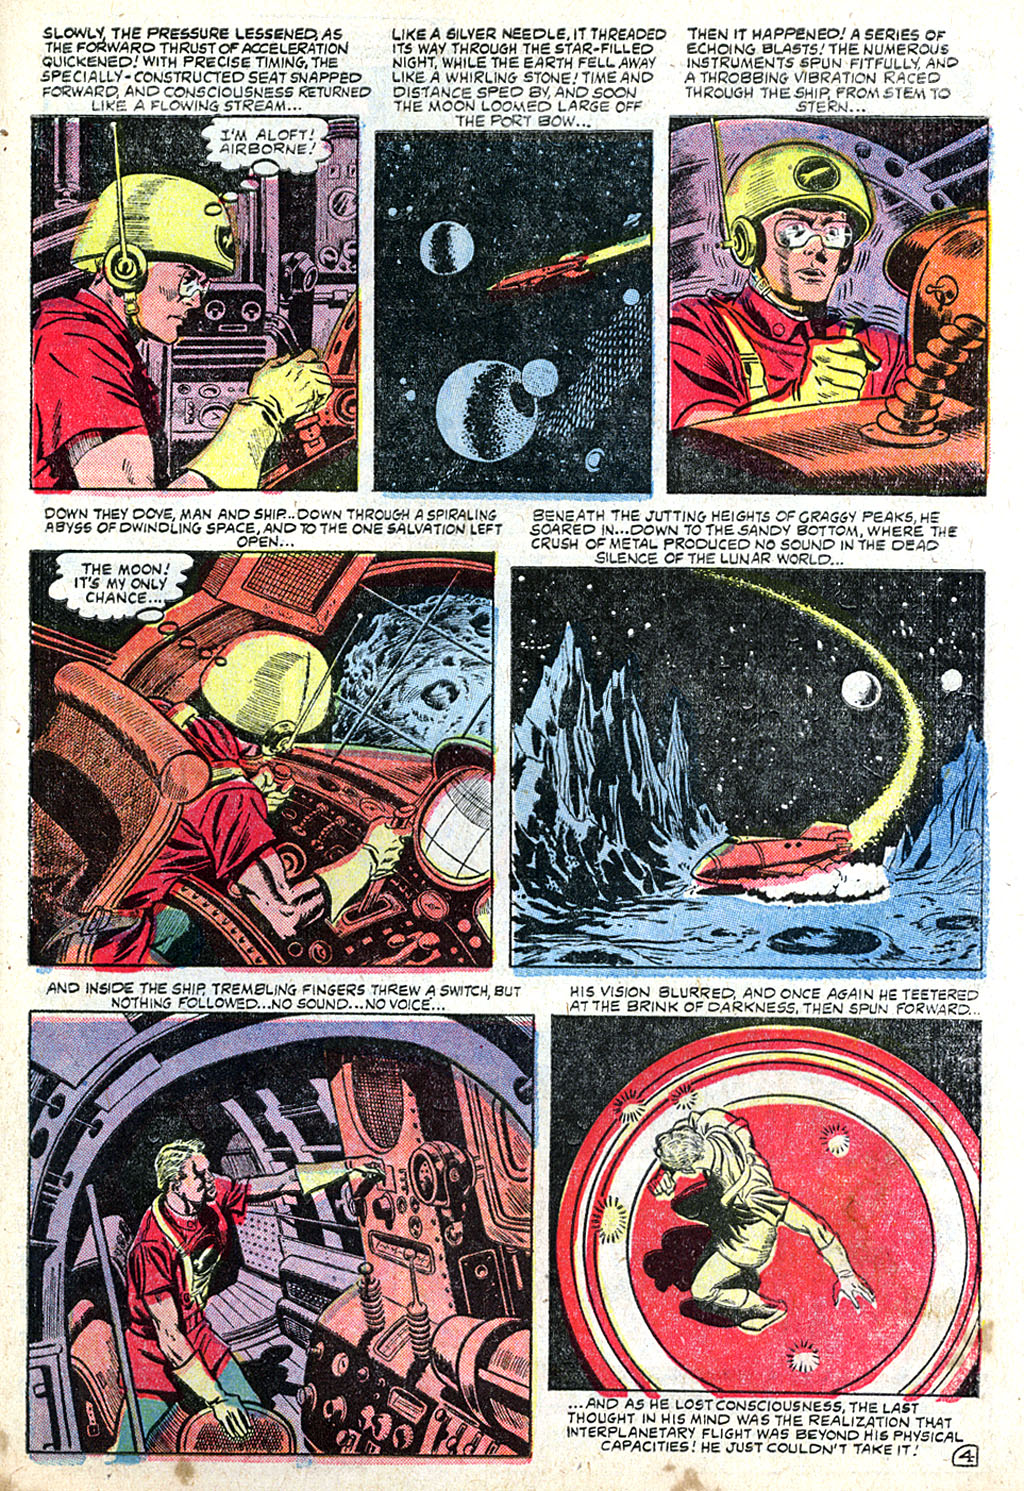 Marvel Tales (1949) 138 Page 29